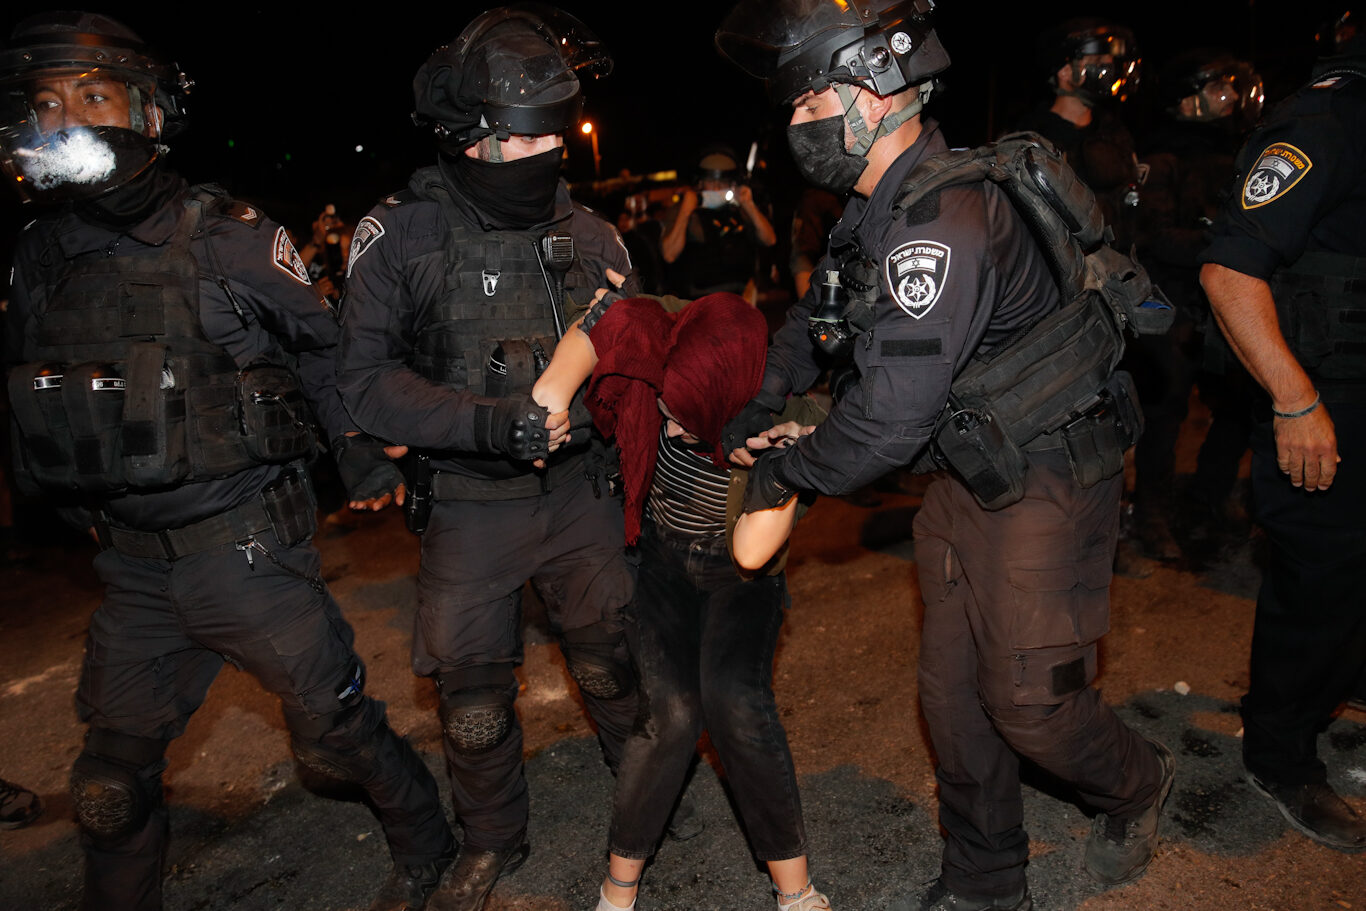 Israeli police grab a girl protesting the theft of Palestinian homes in Sheikh Jarrah, May 8, 2021.